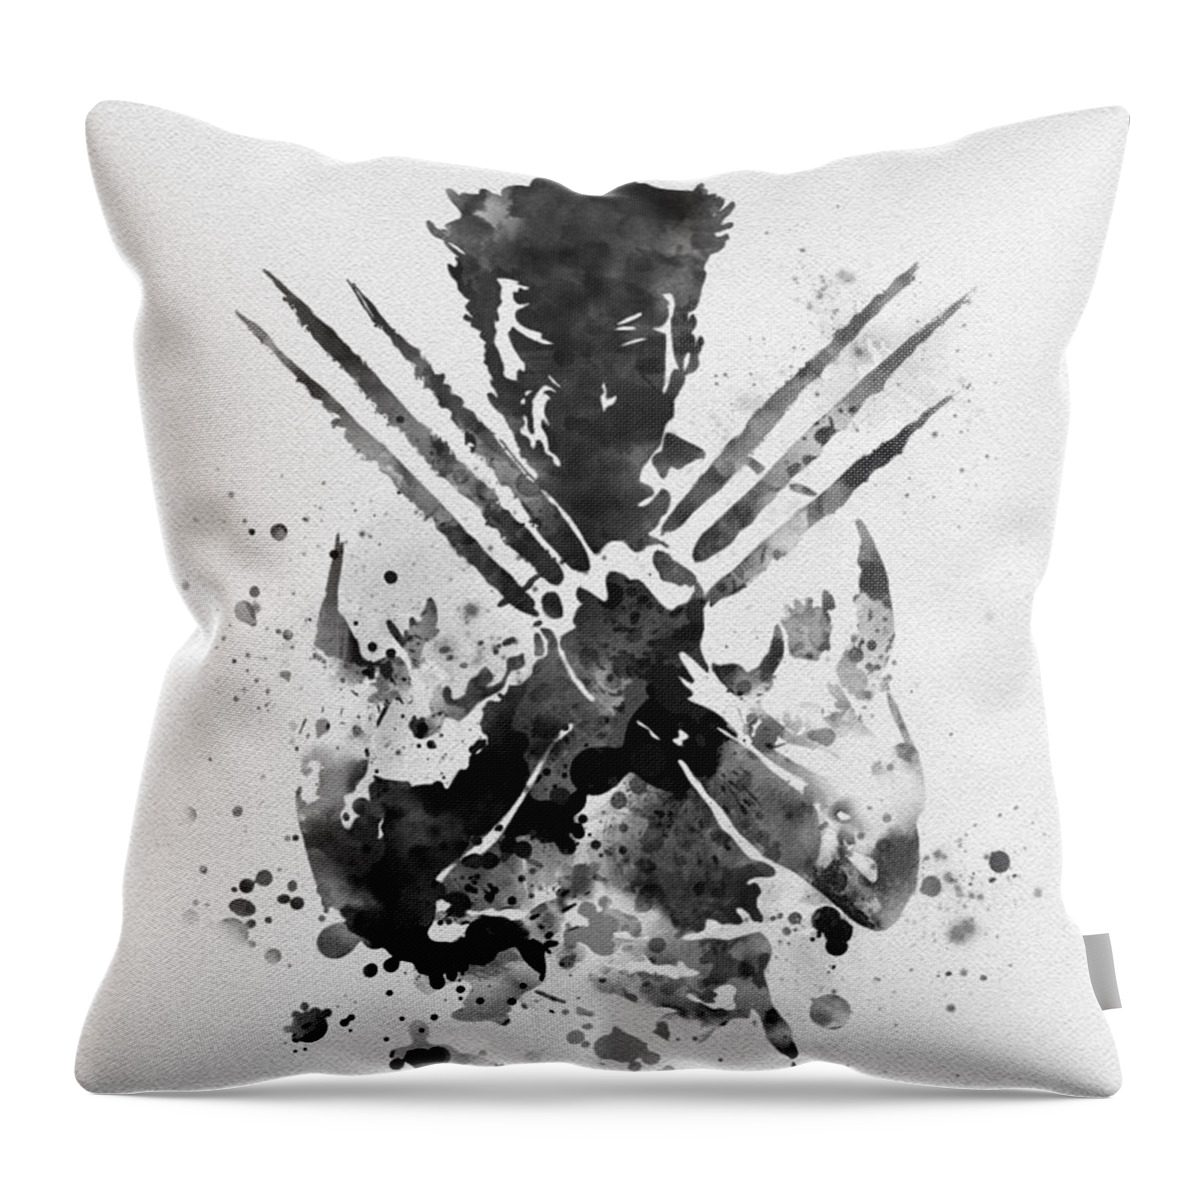 Wolverine Throw Pillow featuring the mixed media Wolverine by My Inspiration